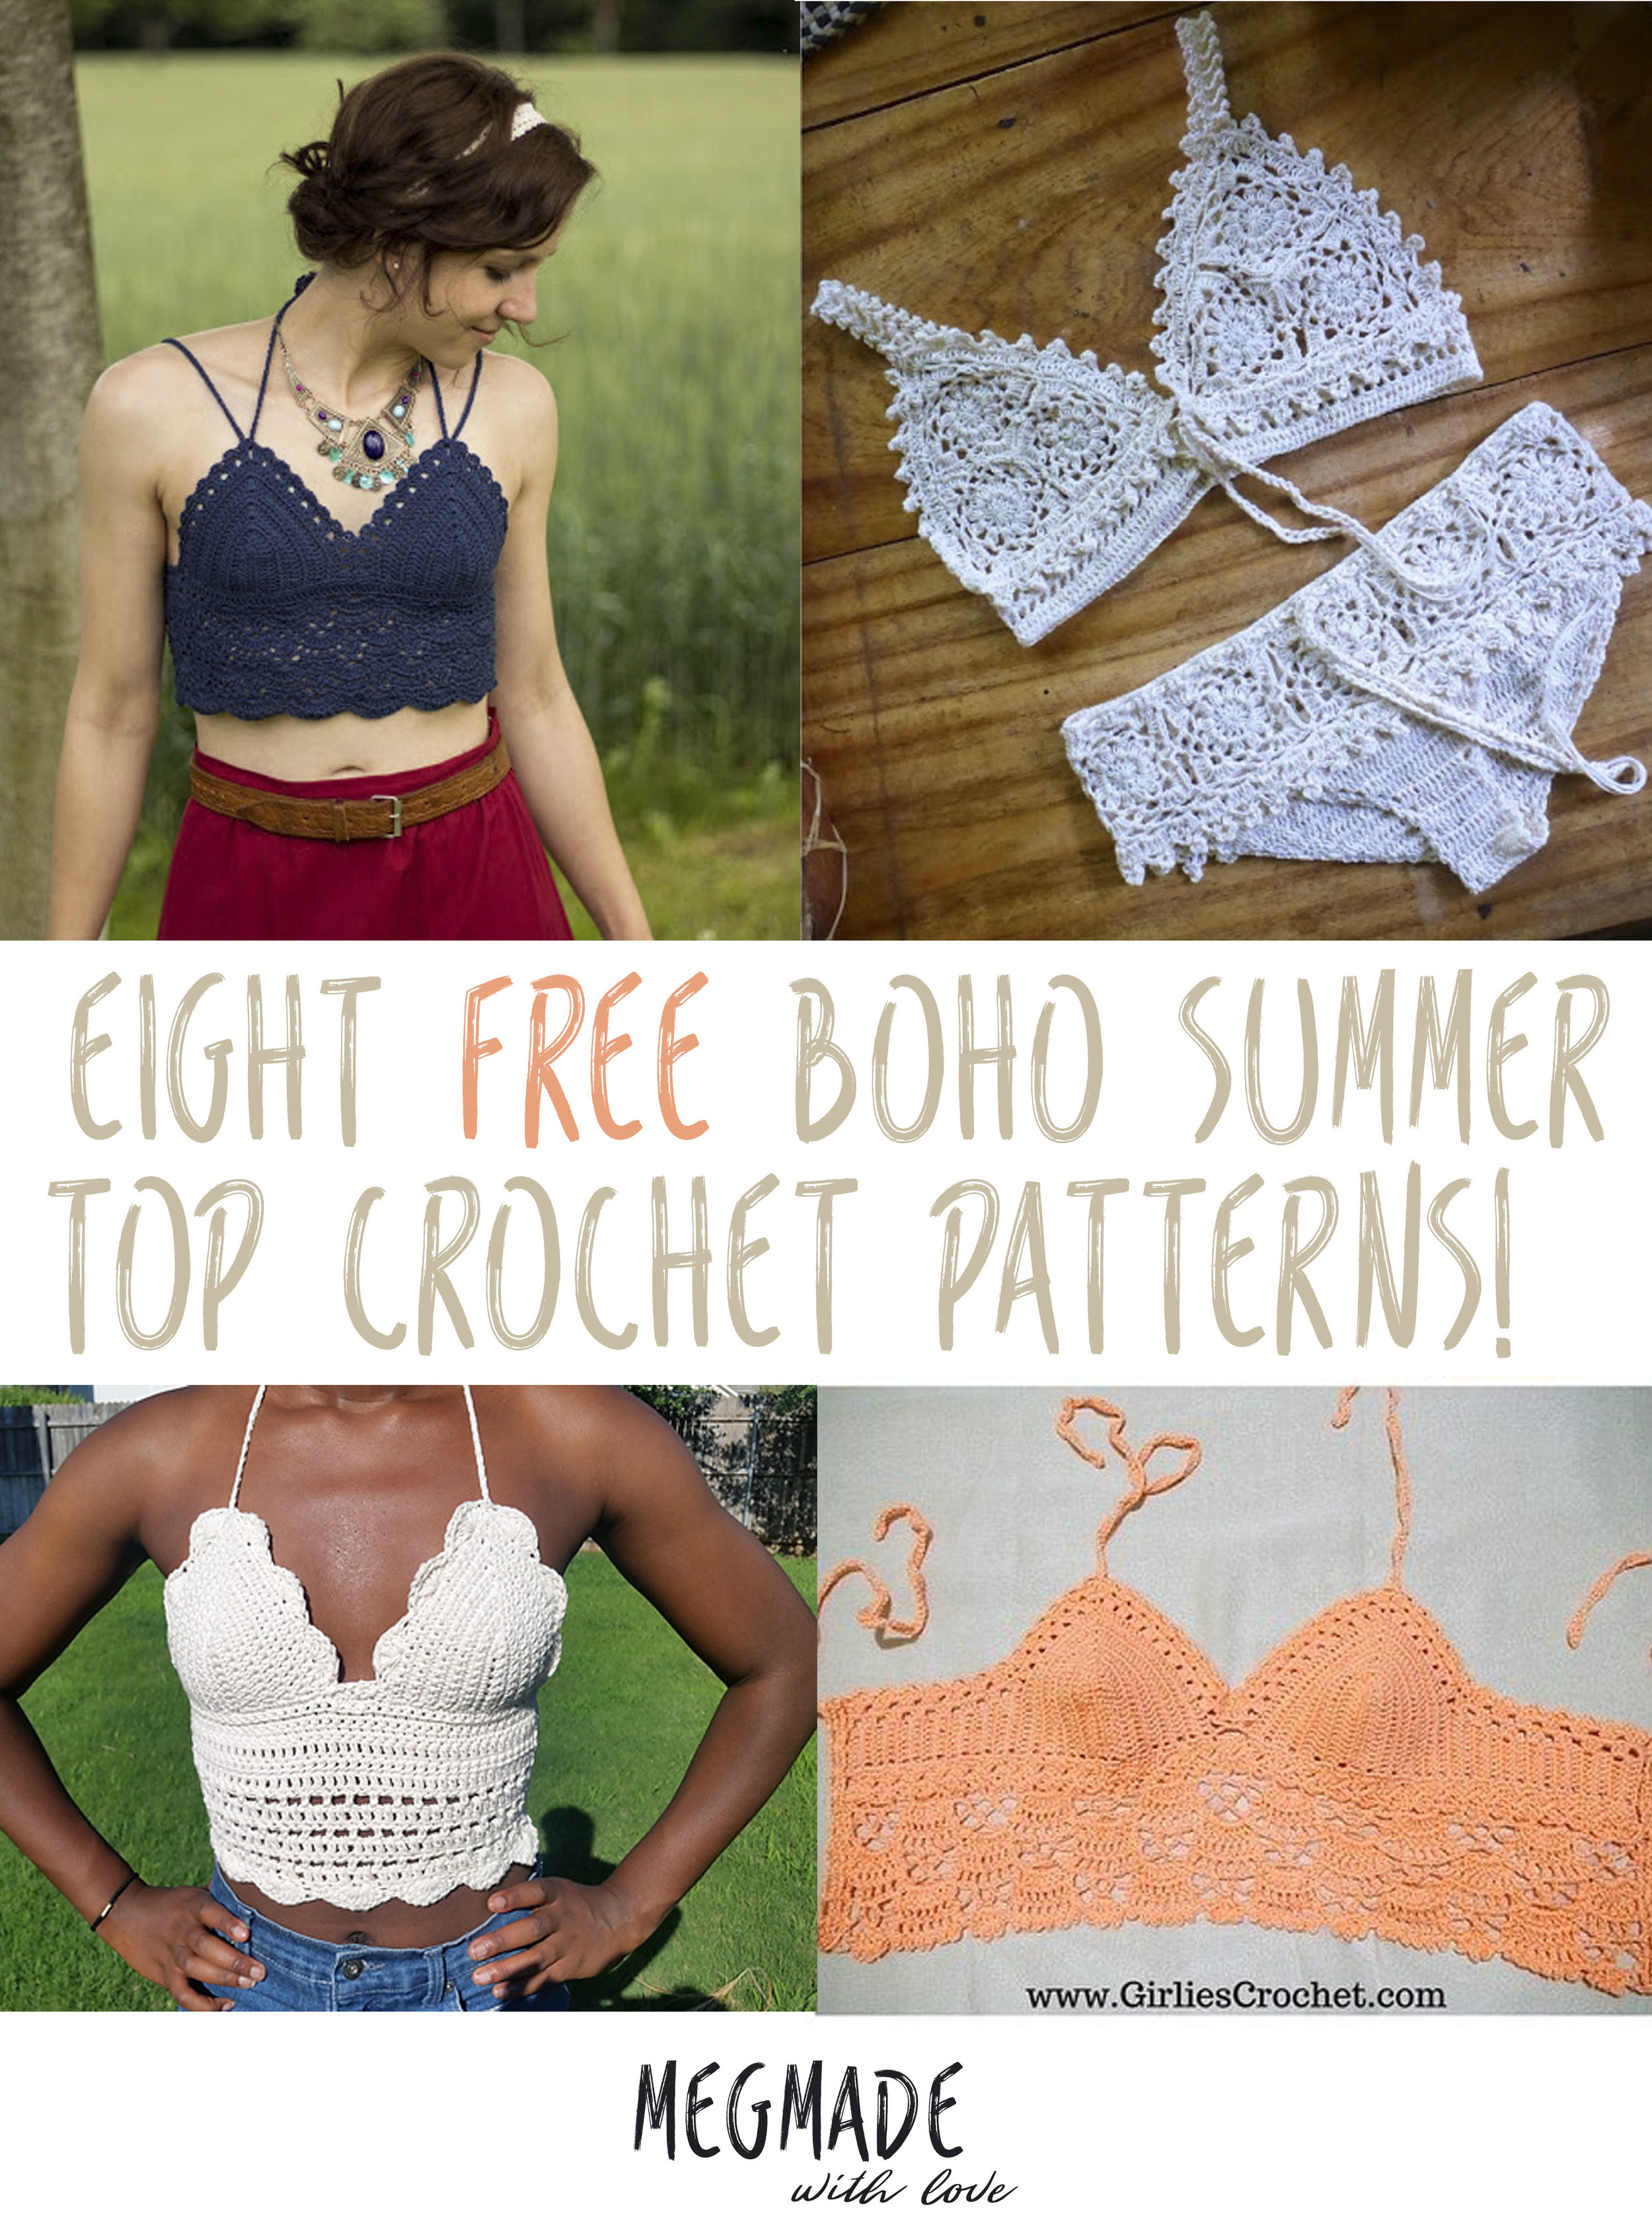 8 Free Boho Summer Top Crochet Patterns — Megmade with Love